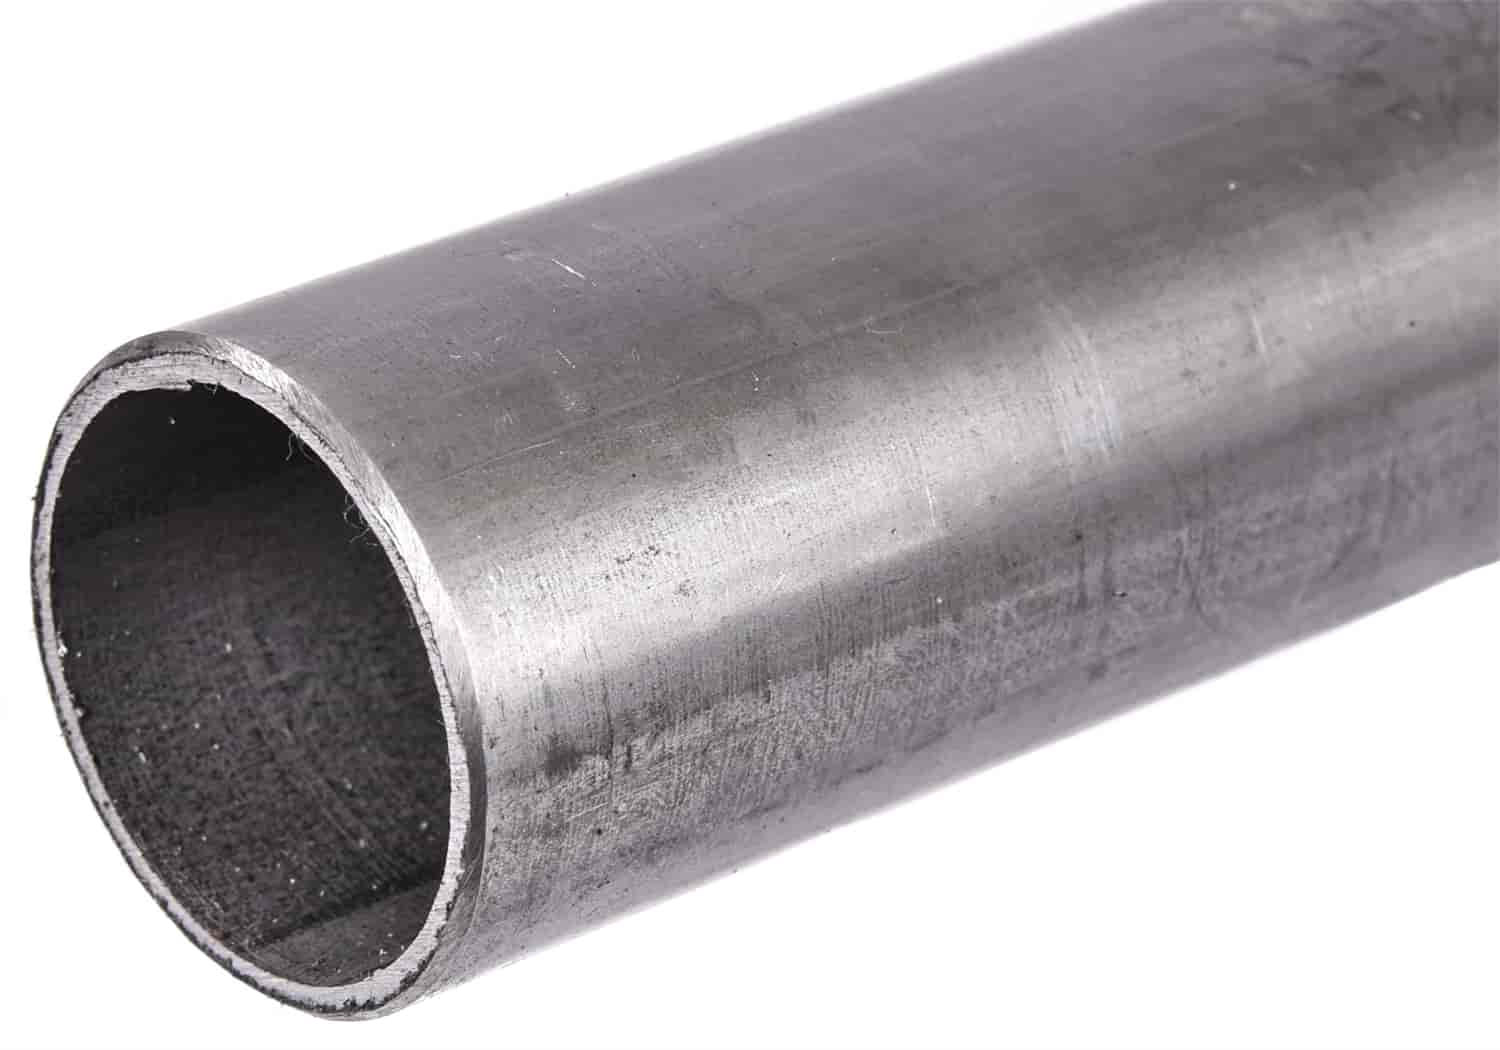 Mild Steel Tubing [Round, 1 1/4 in. Diameter x 0.083 in. Thickness x 4 ft. Length]